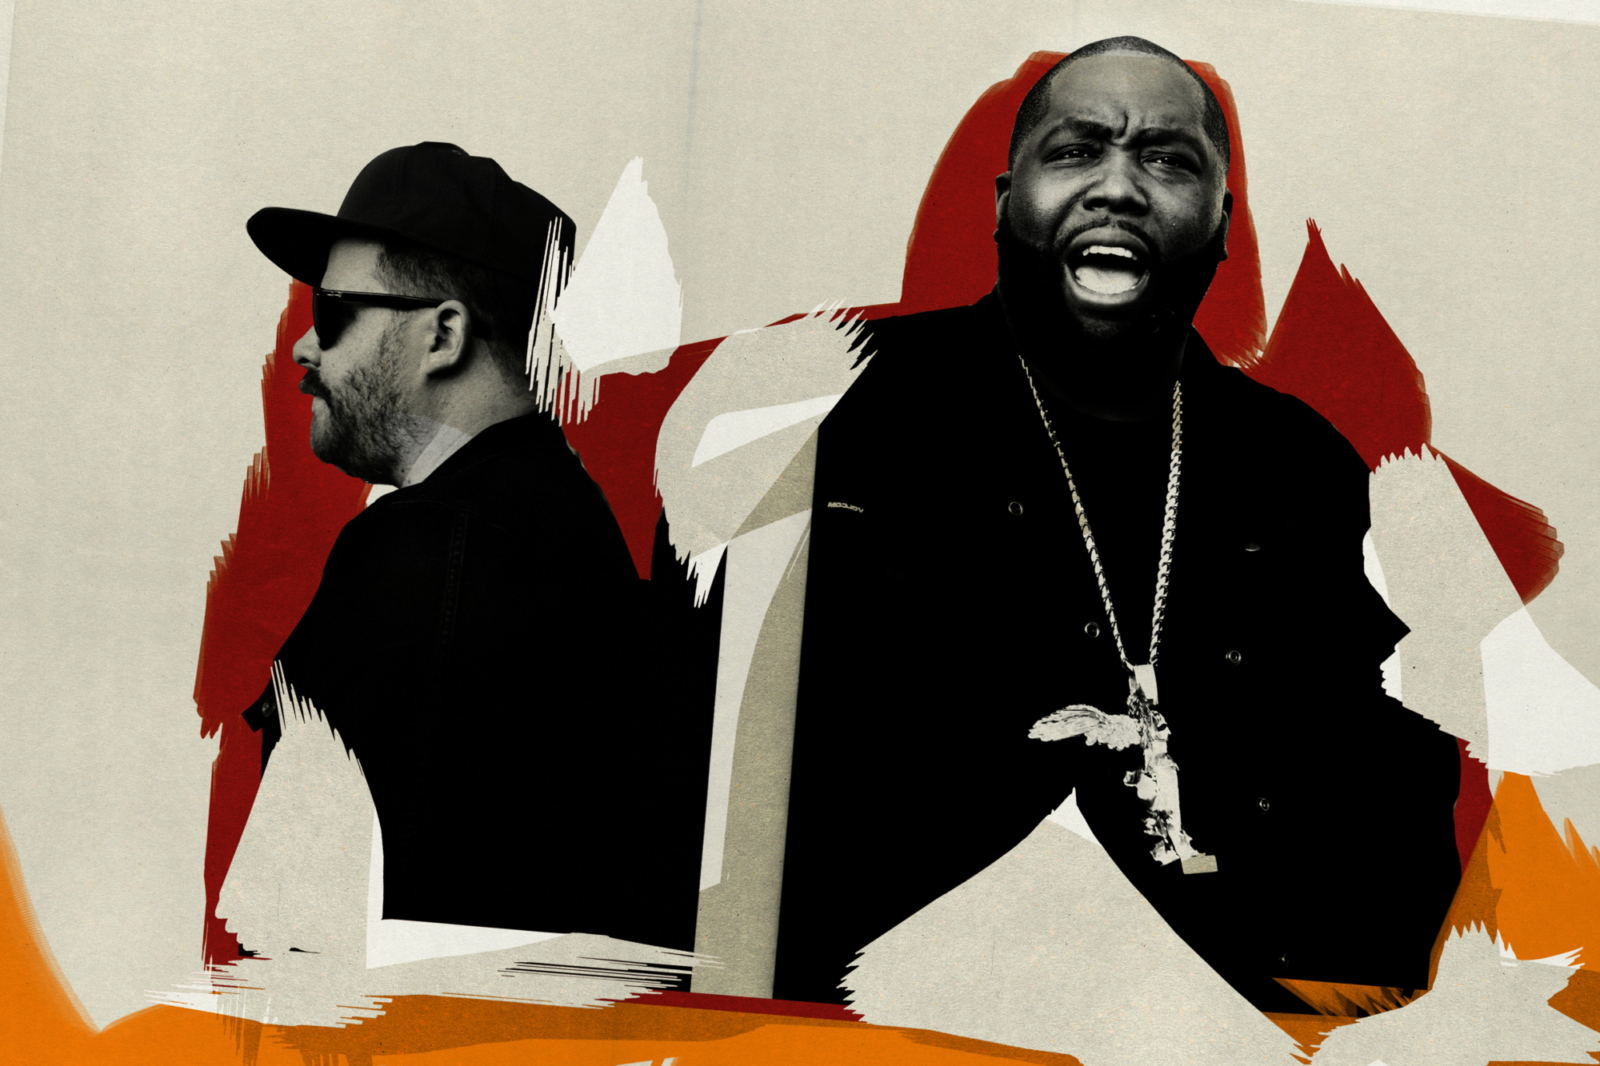 BOOTS teams up with Run The Jewels on ‘Delete Delete’